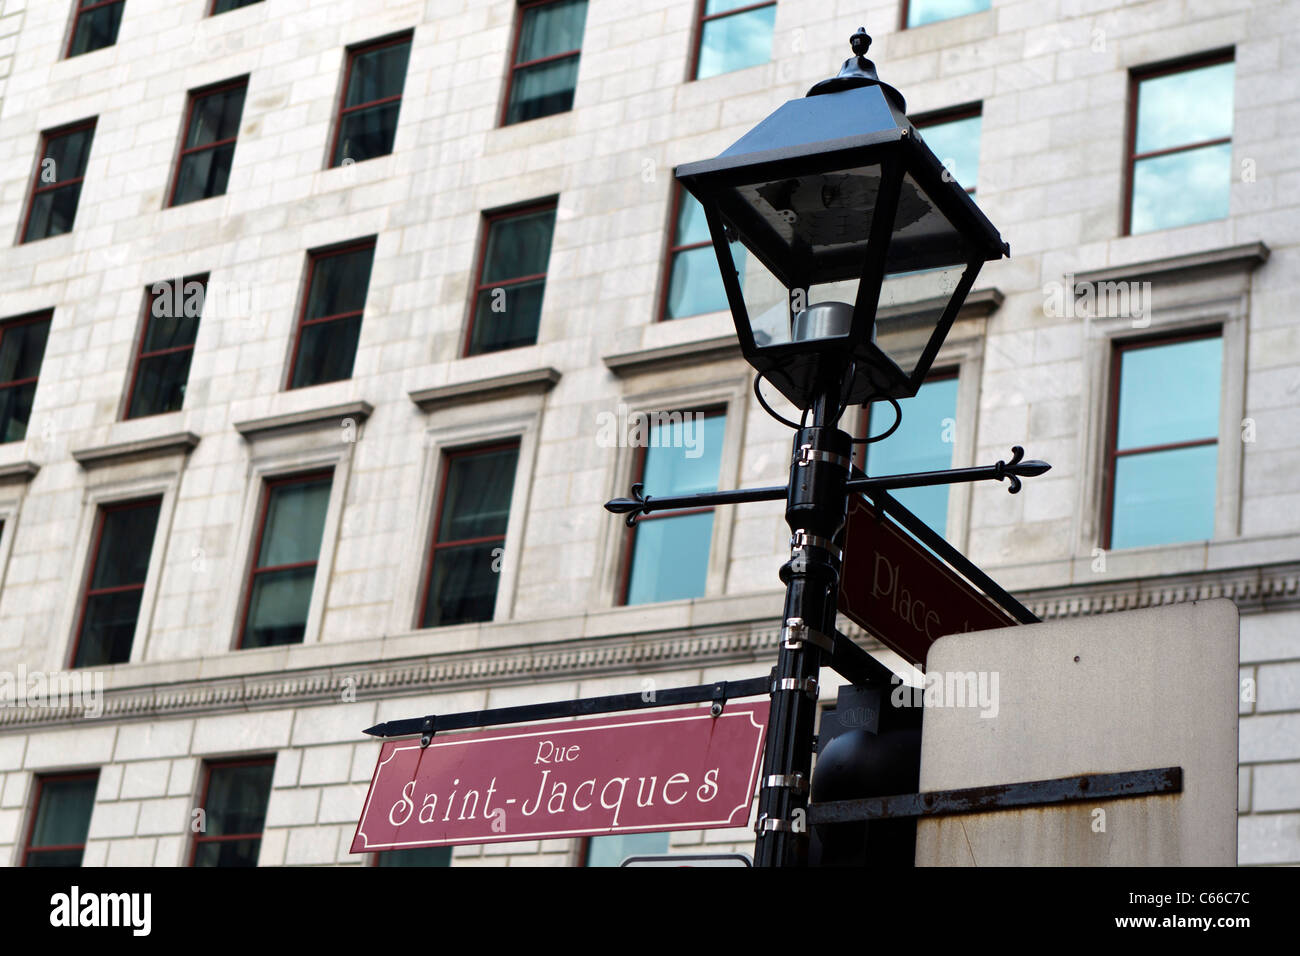 Street sign for Rue Saint-Jacques with lamp post and office windows in the background, old town Montreal, Quebec, Canada Stock Photo